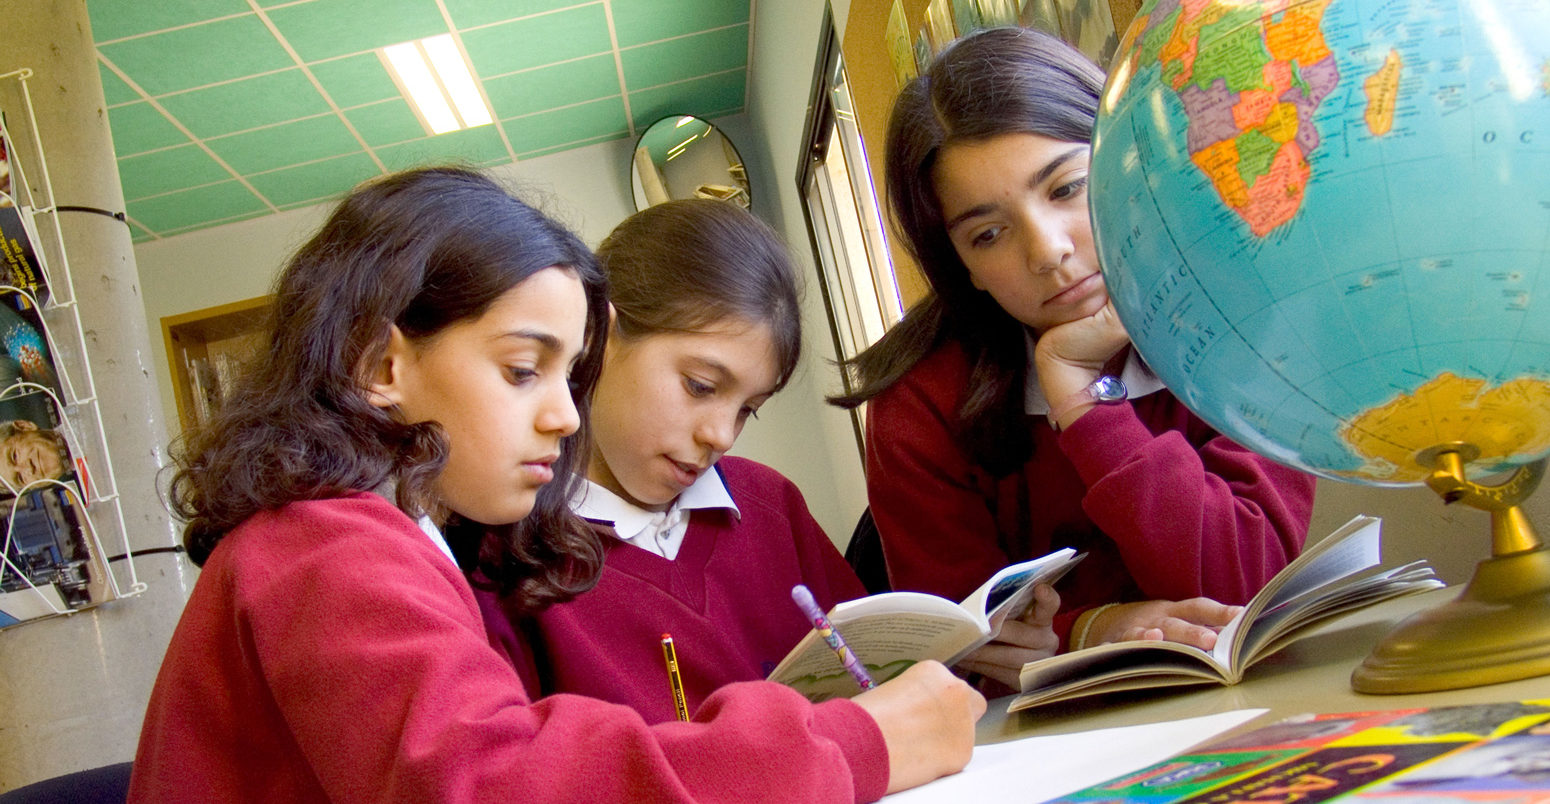 Three junior school girls studying the globe atlas for geography studies in school library_A0NP28